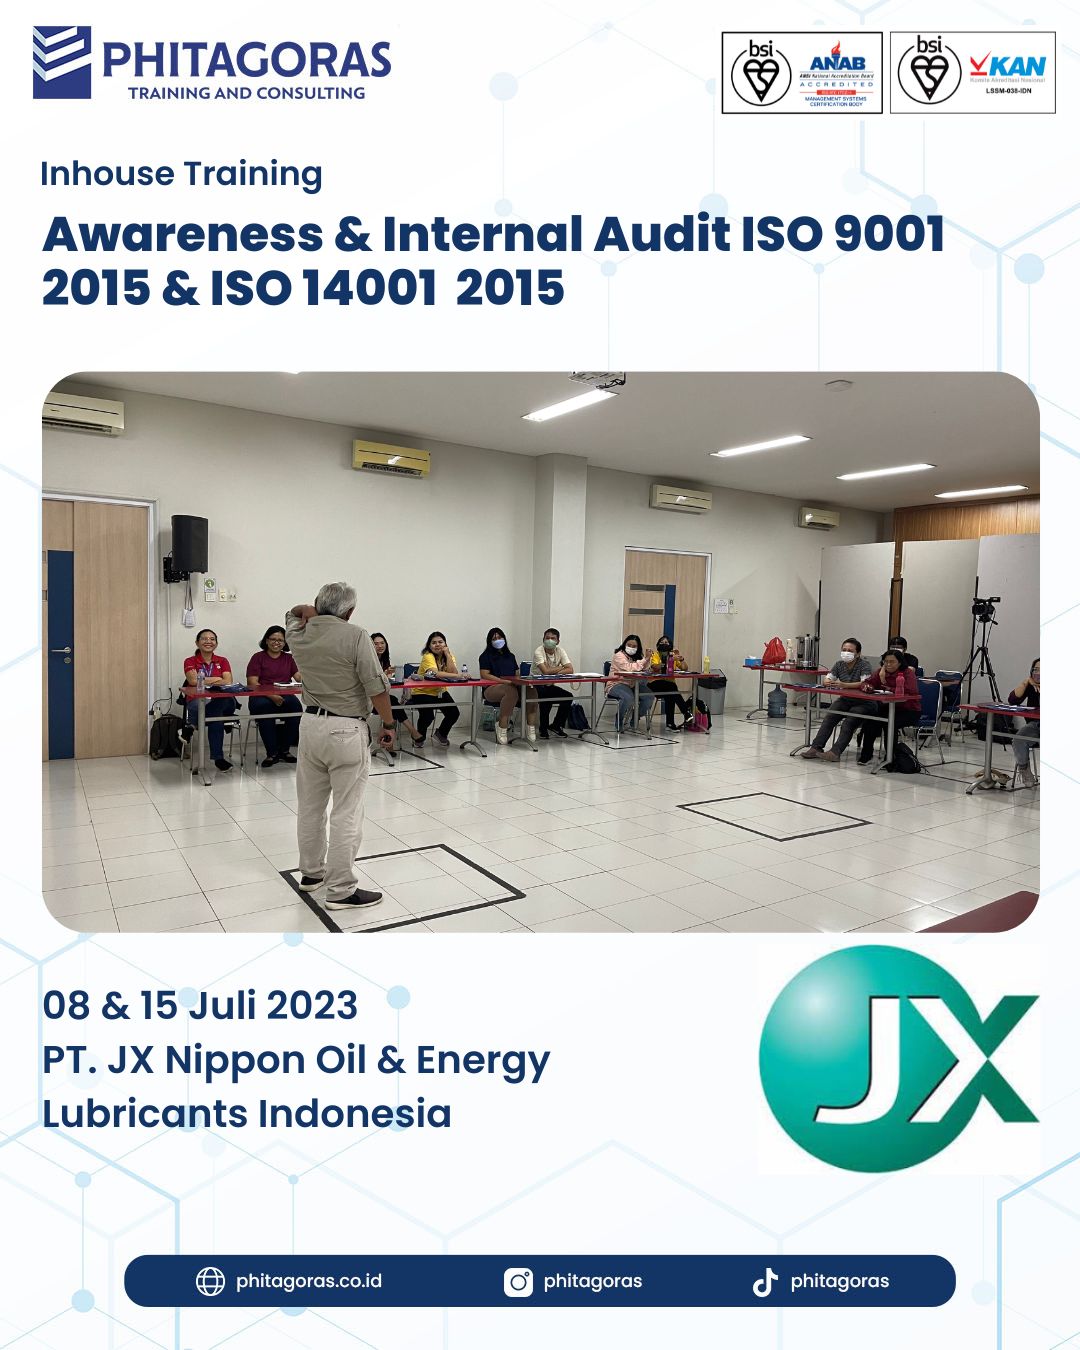 Inhouse Training Awareness & Internal Audit ISO 9001 2015 & ISO 14001 2015 - PT. JX Nippon Oil & Energy Lubricants Indonesia